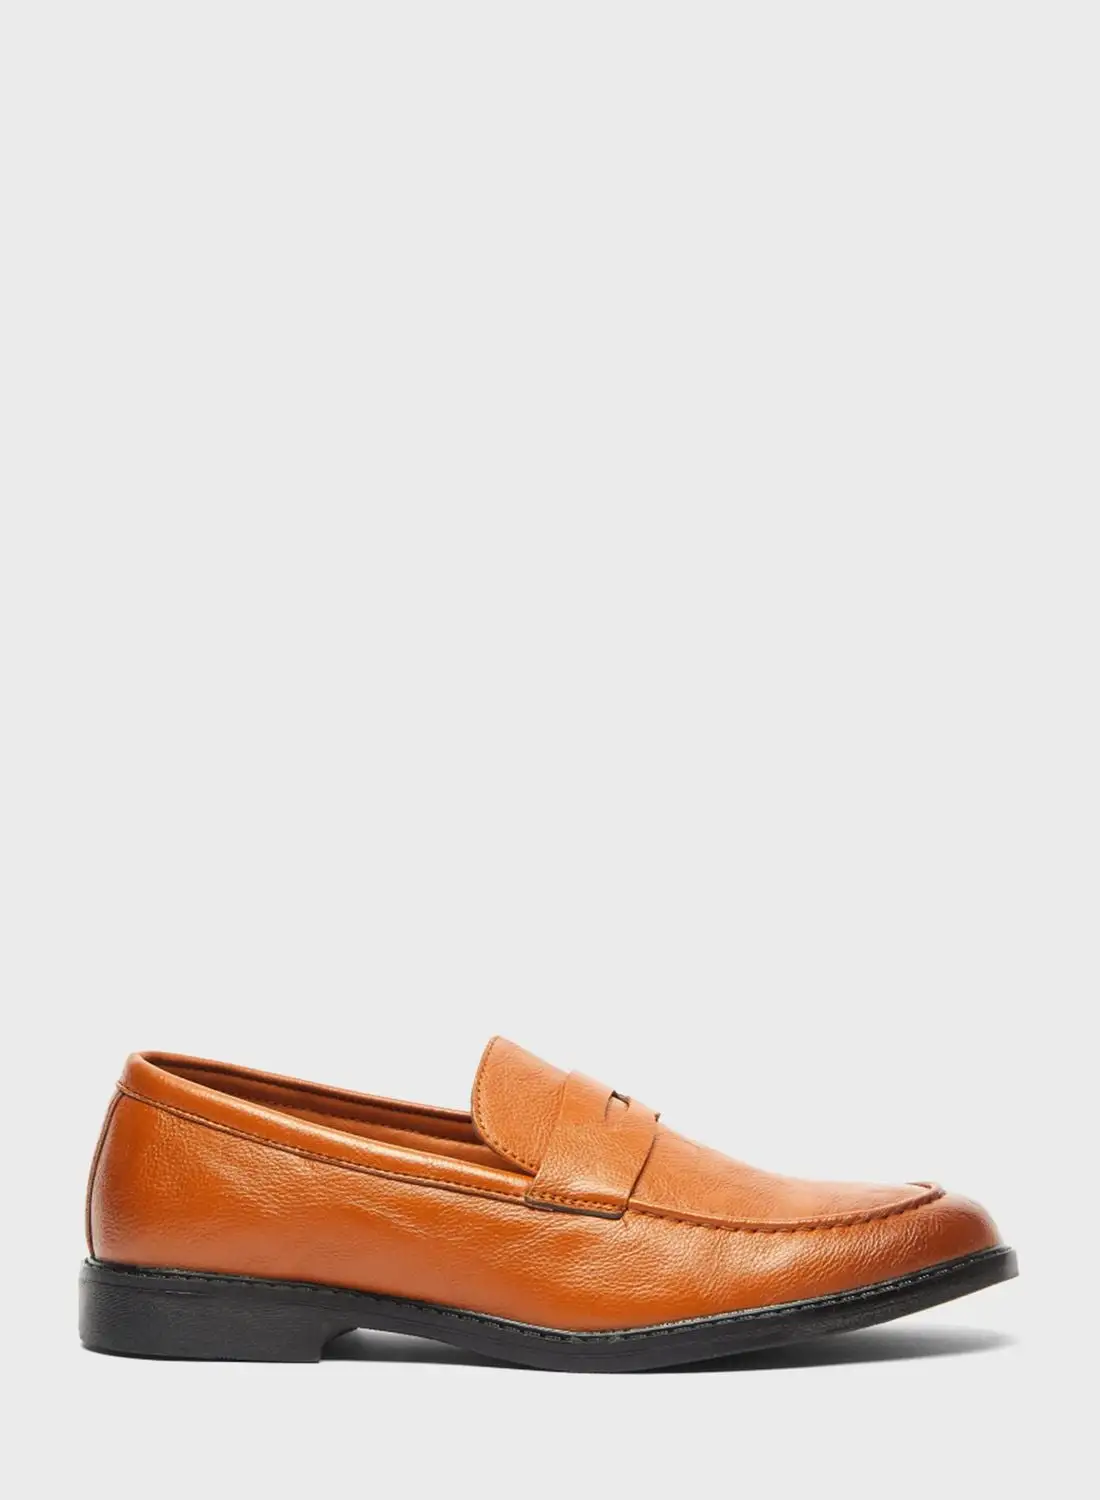 shoexpress Casual Slip On Loafers